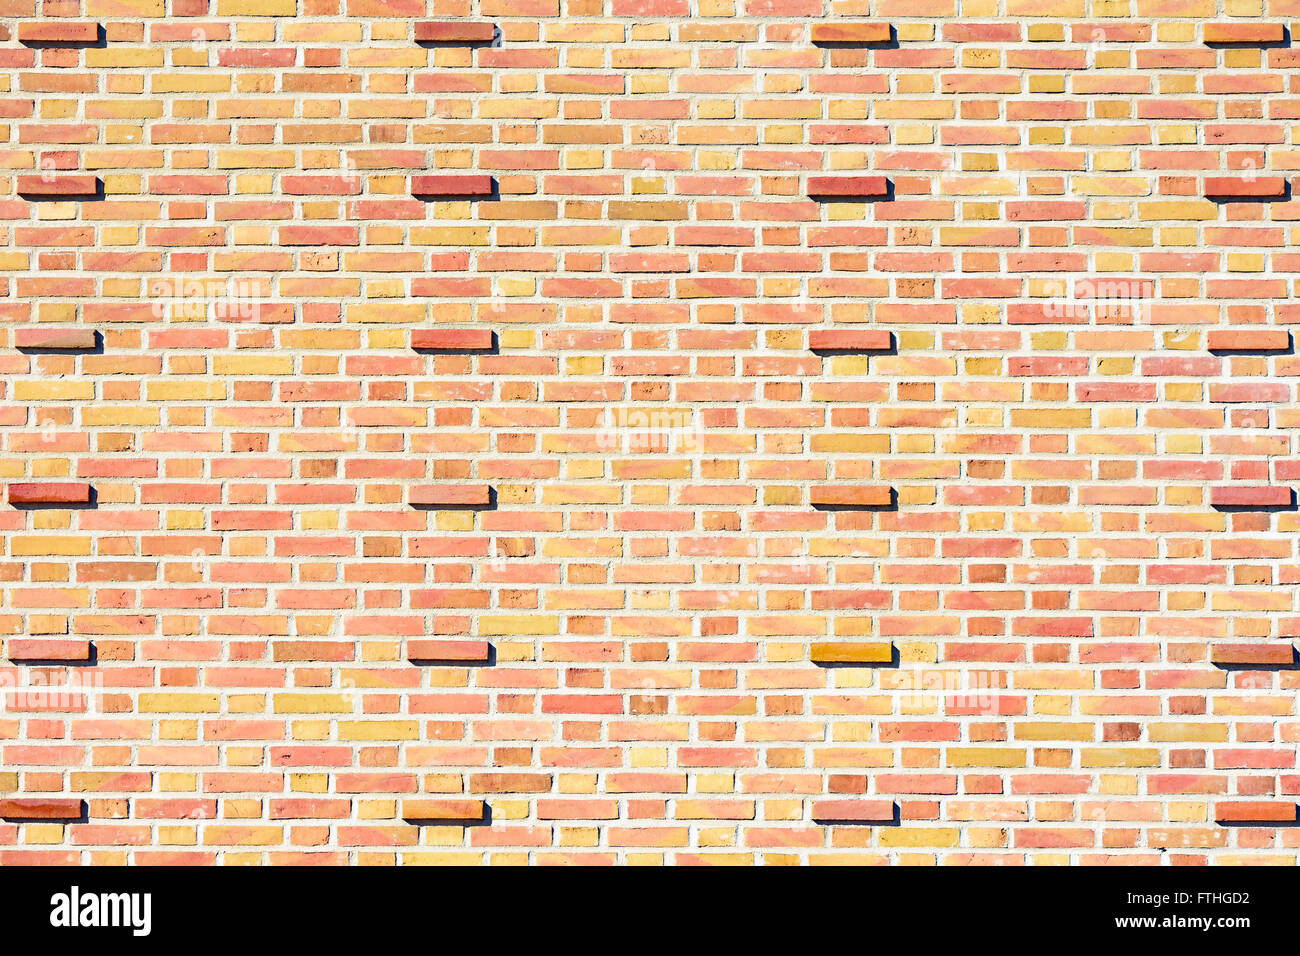 Pale yellow and red brick wall with protruding bricks at intervals. Interesting background. Stock Photo